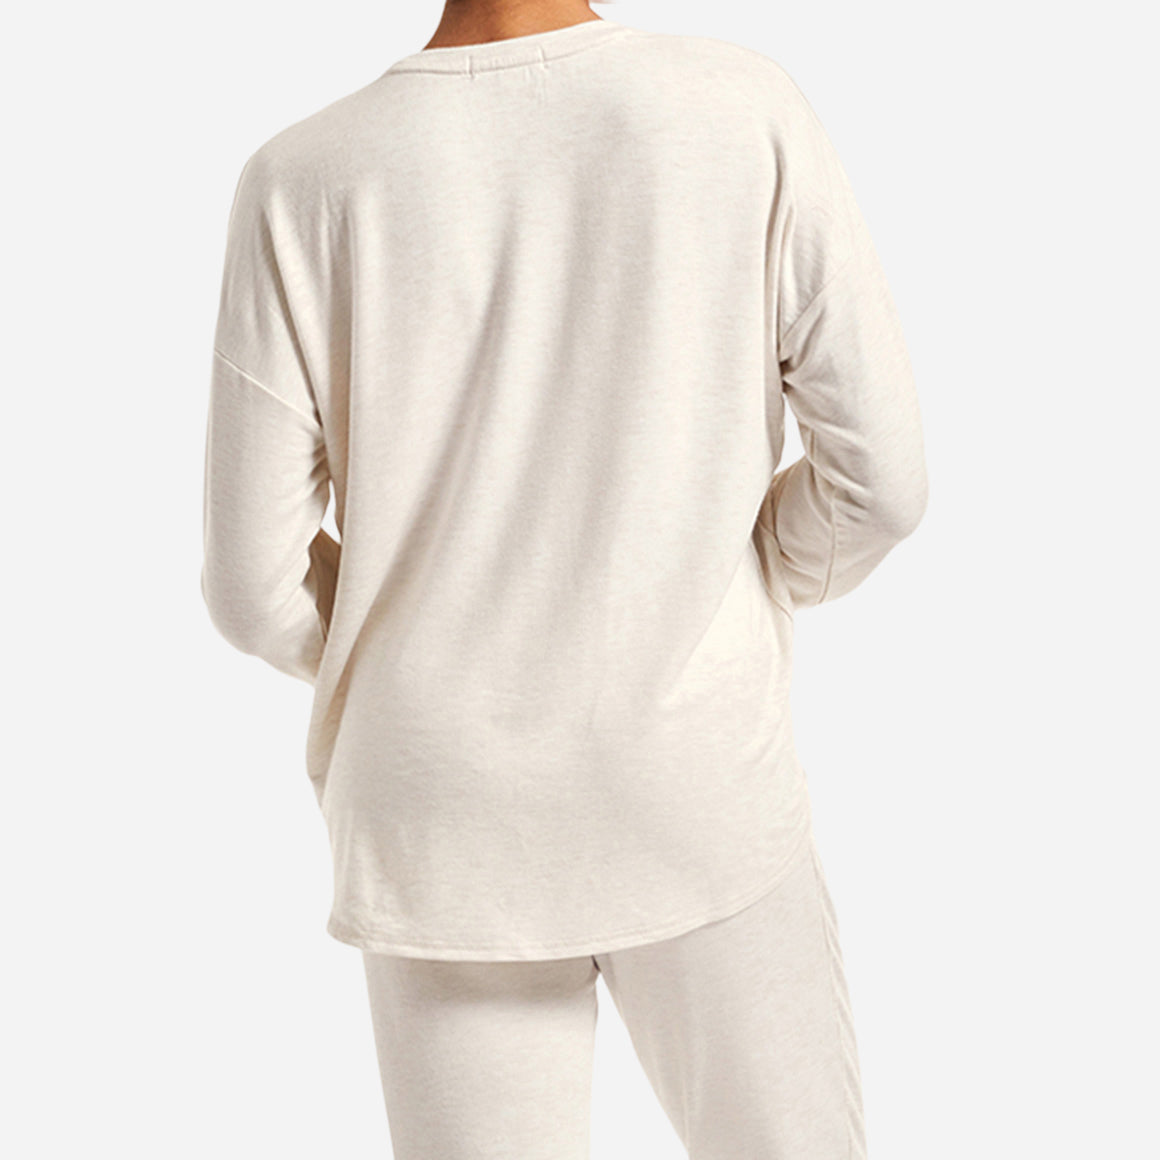 This t-shirt has a relaxed, slightly oversized fit and features a flattering crew neckline, curved hemline for extra coverage, and dropped shoulders perfect for sleep or play.